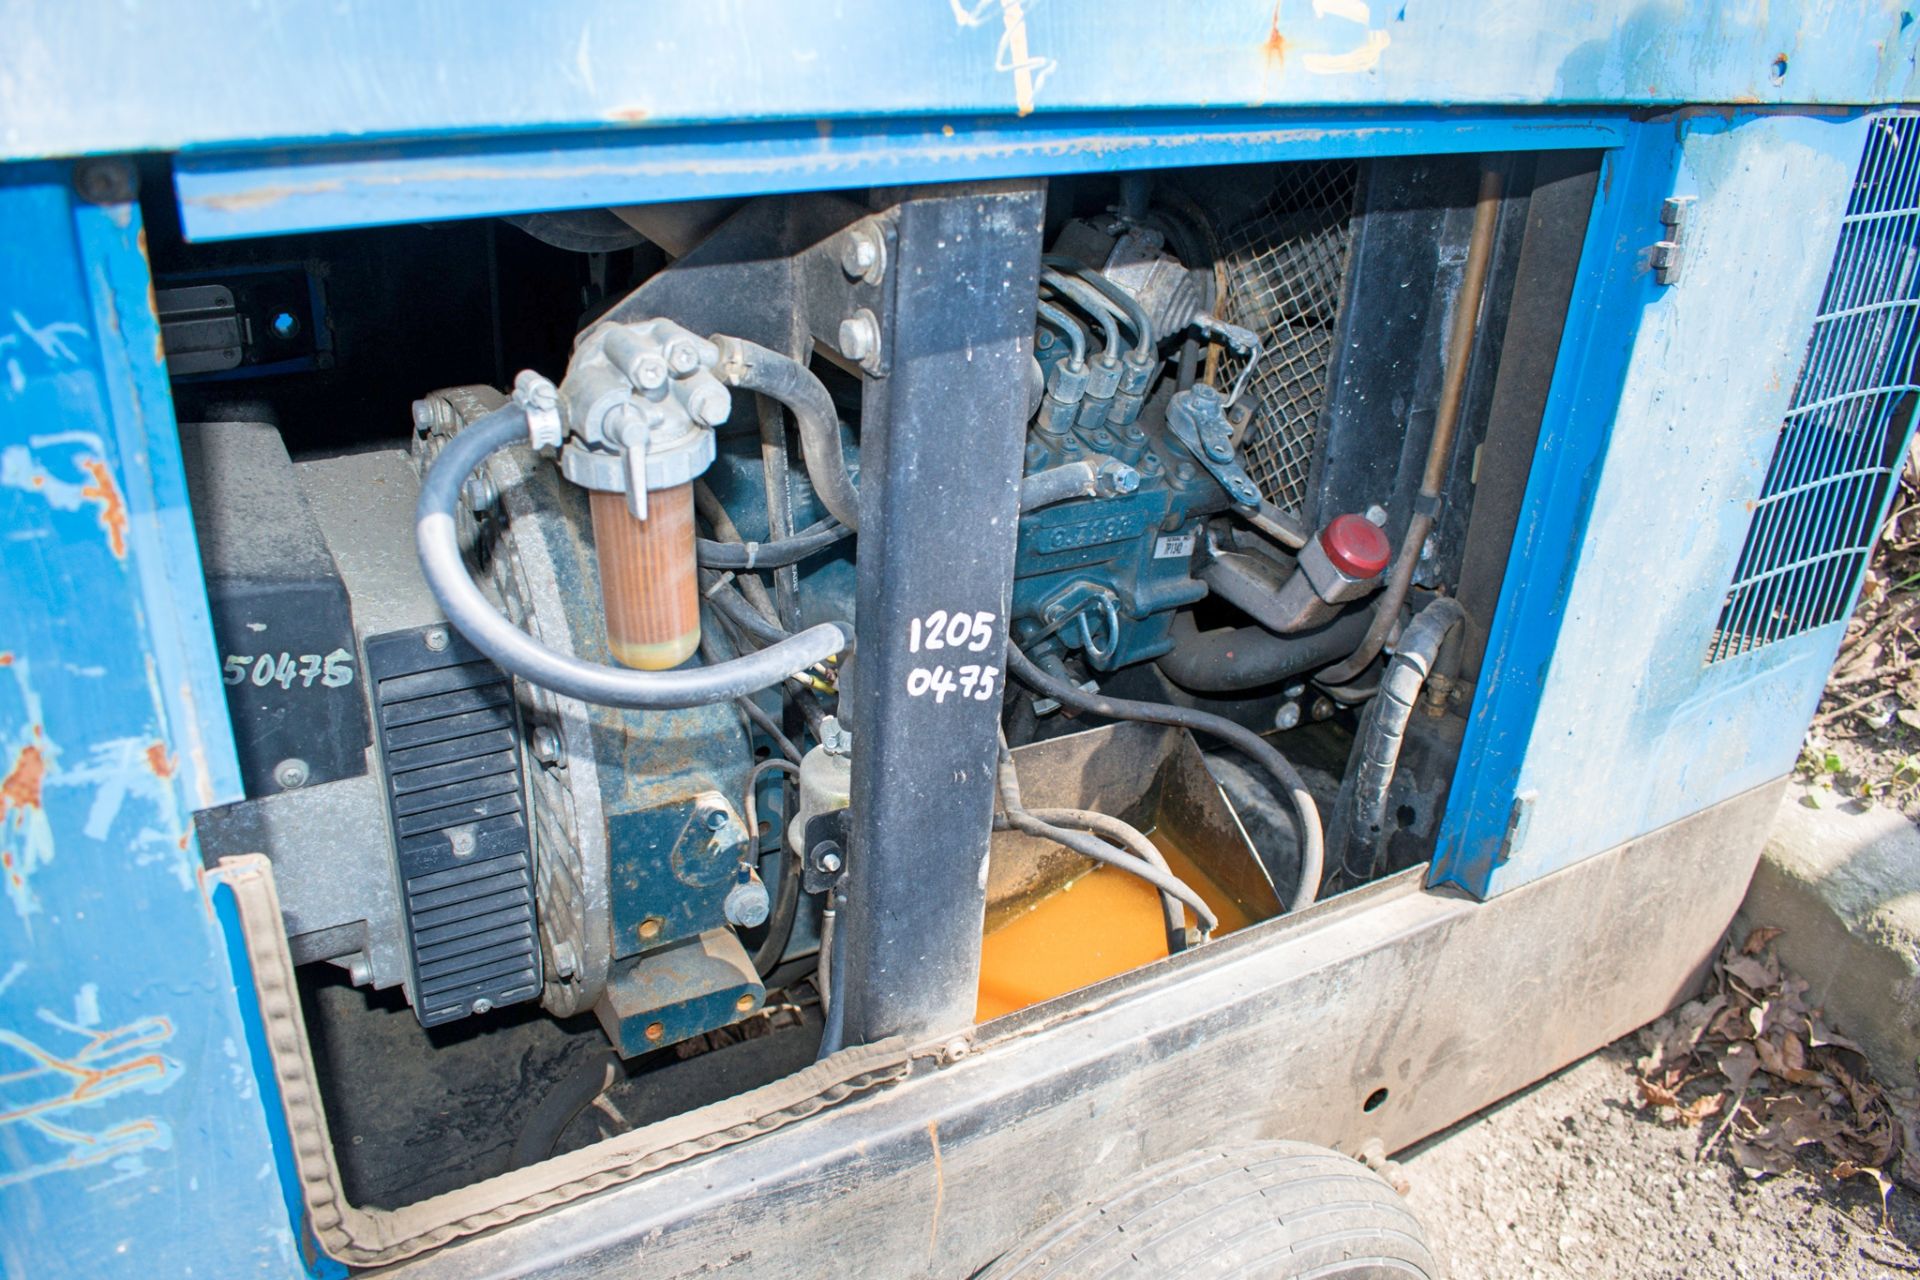 Stephill 10 kva diesel driven generator ** Parts missing ** - Image 4 of 4